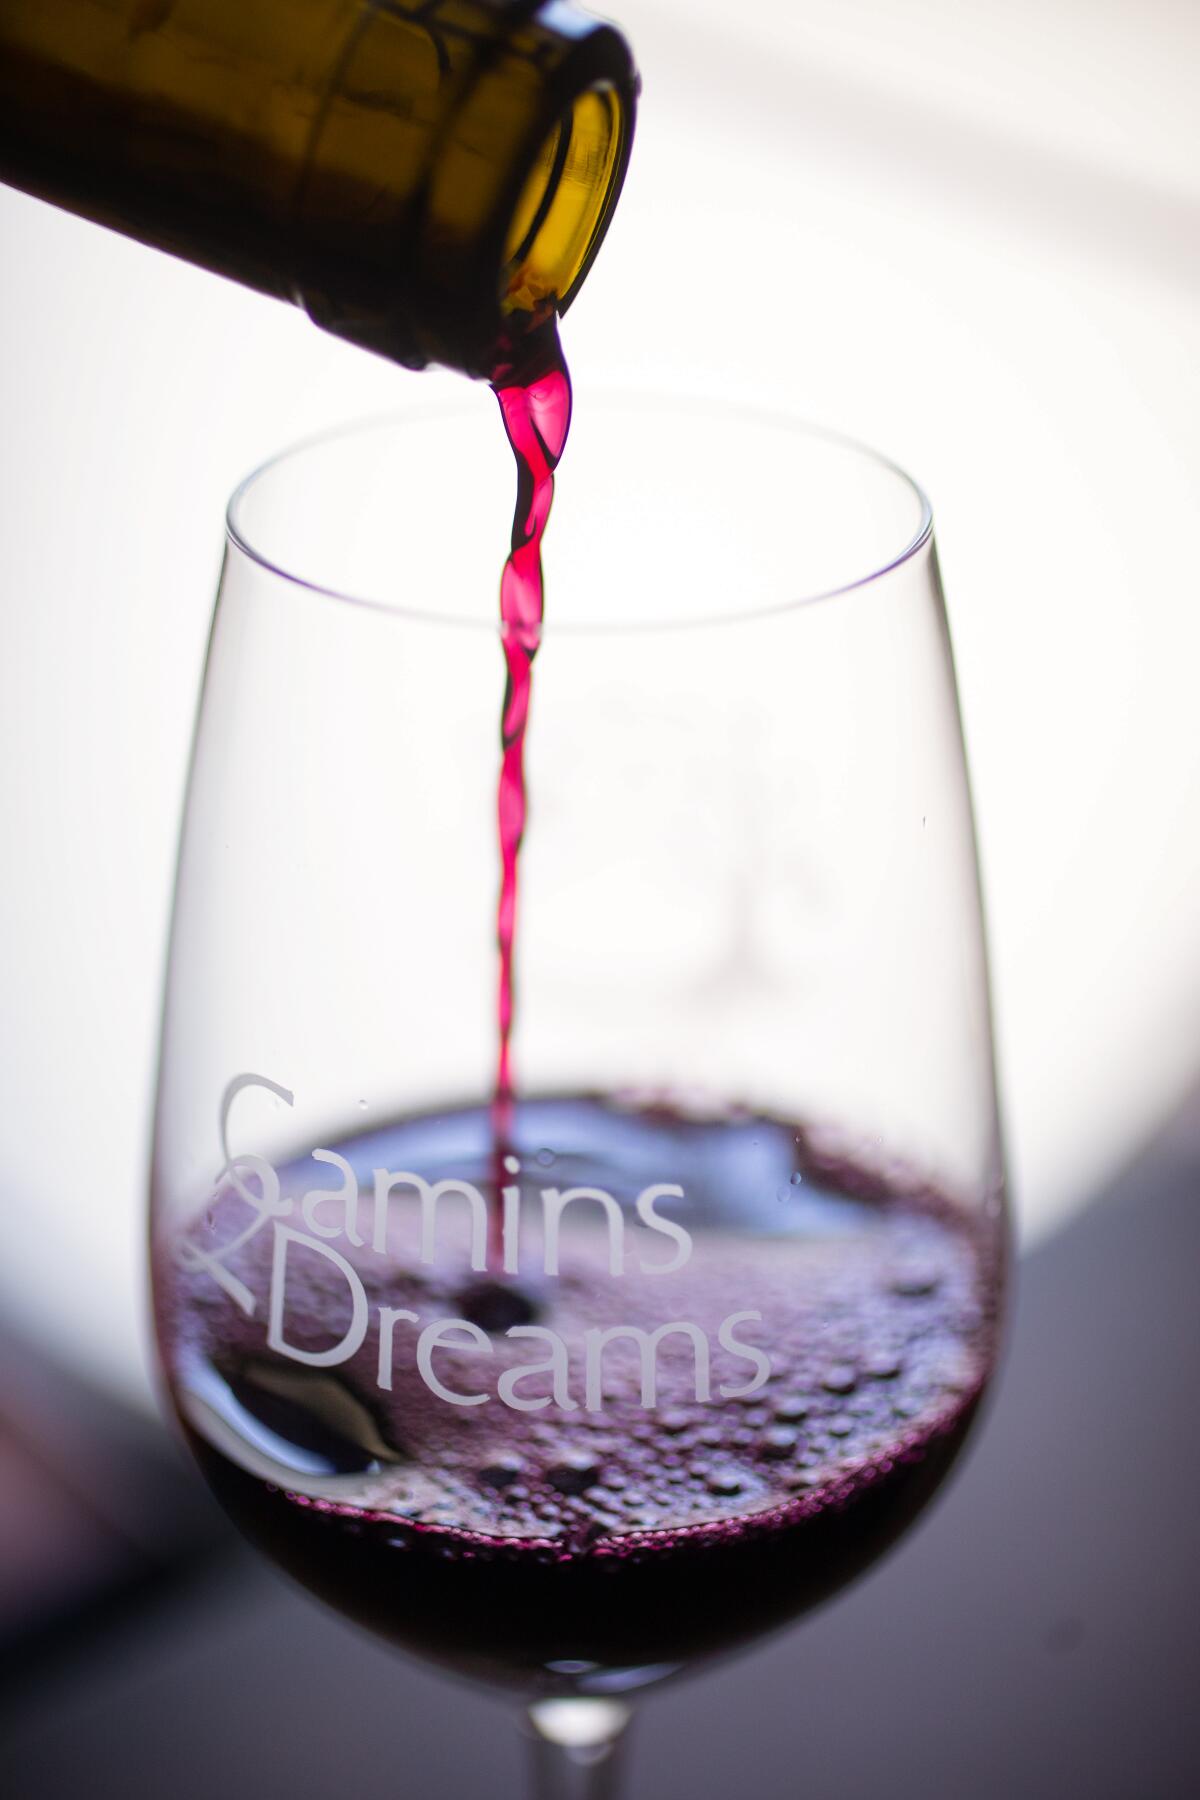 Camins 2 Dreams Carignan wine pours smoothly into a glass. 